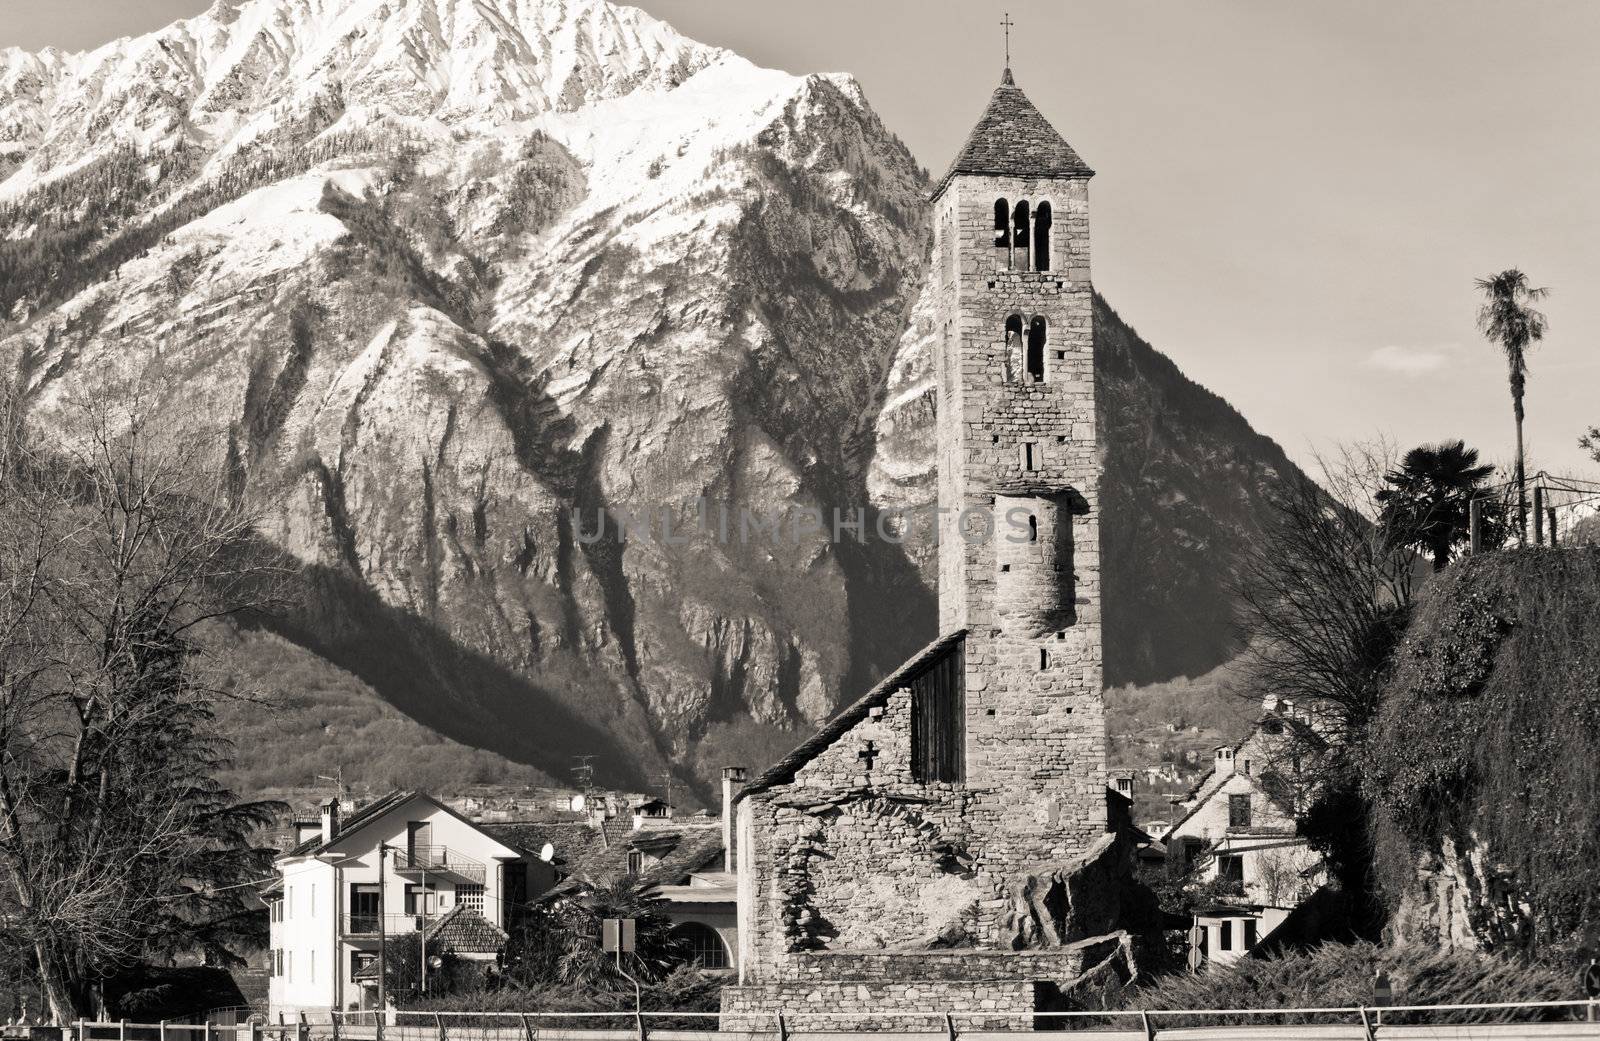 Sepia toned shot of an ancient Italian church with the Alps in the background